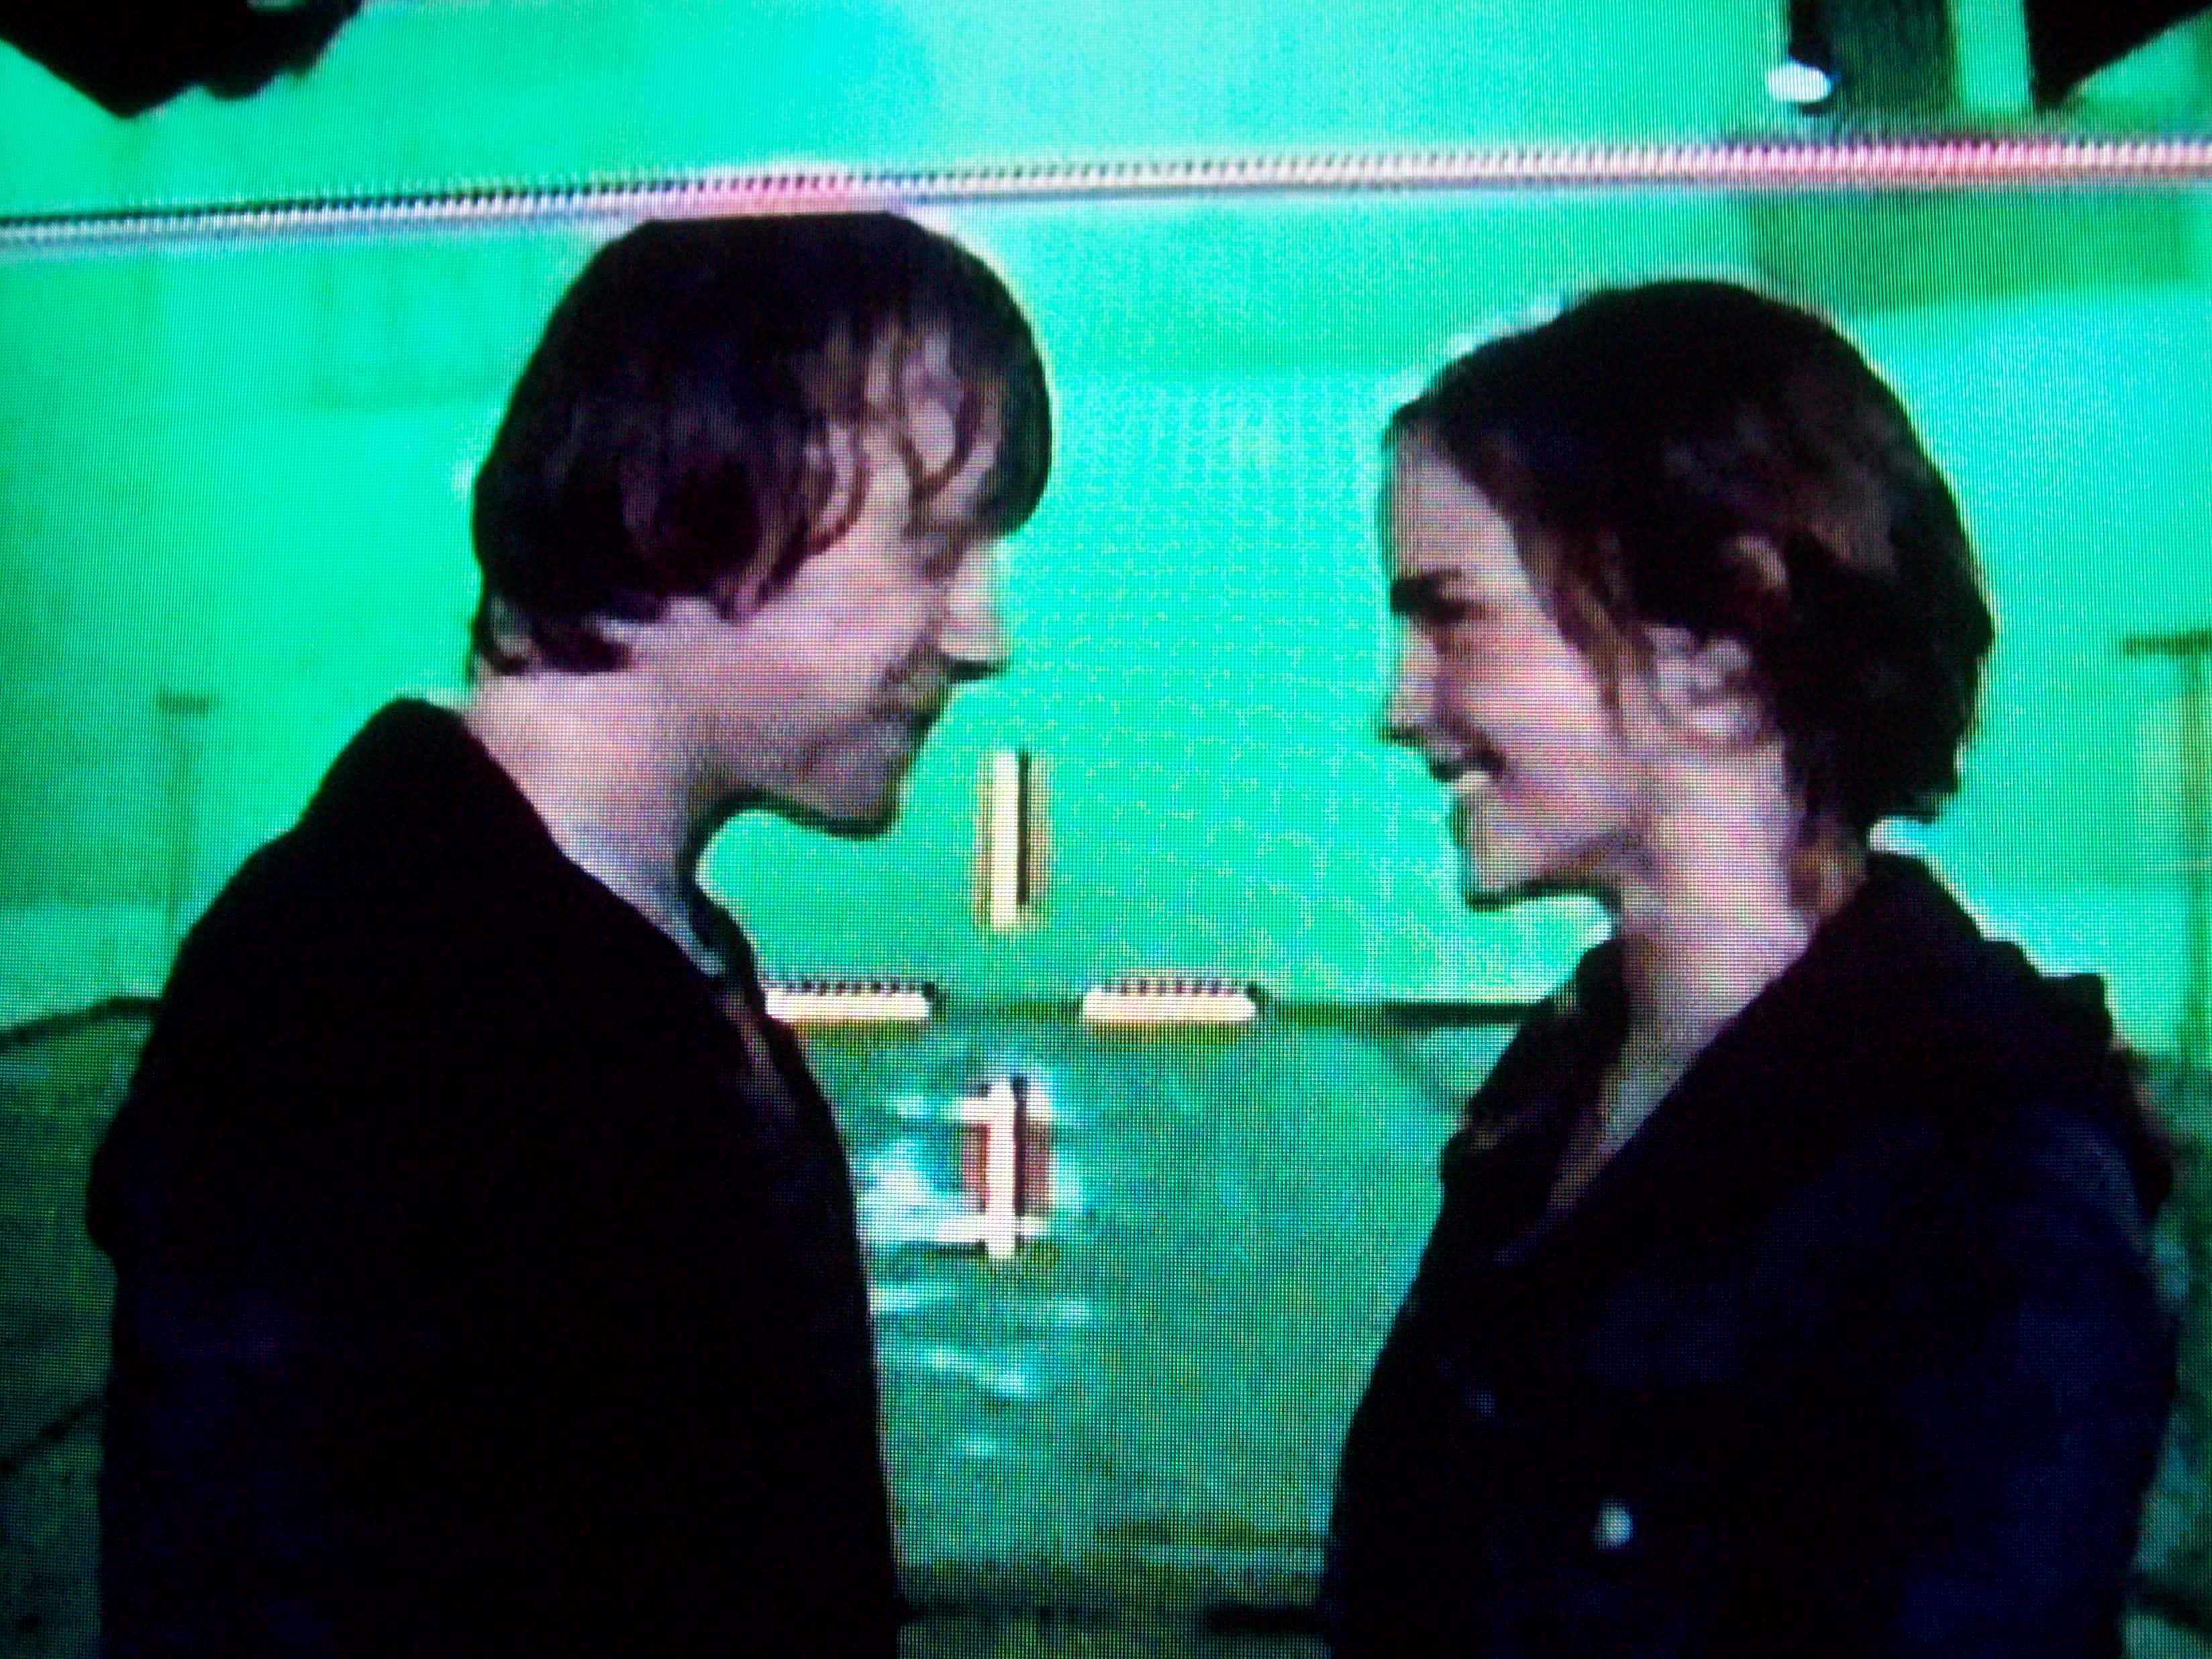 Harry potter 7 part 1 hermione and harry kiss.